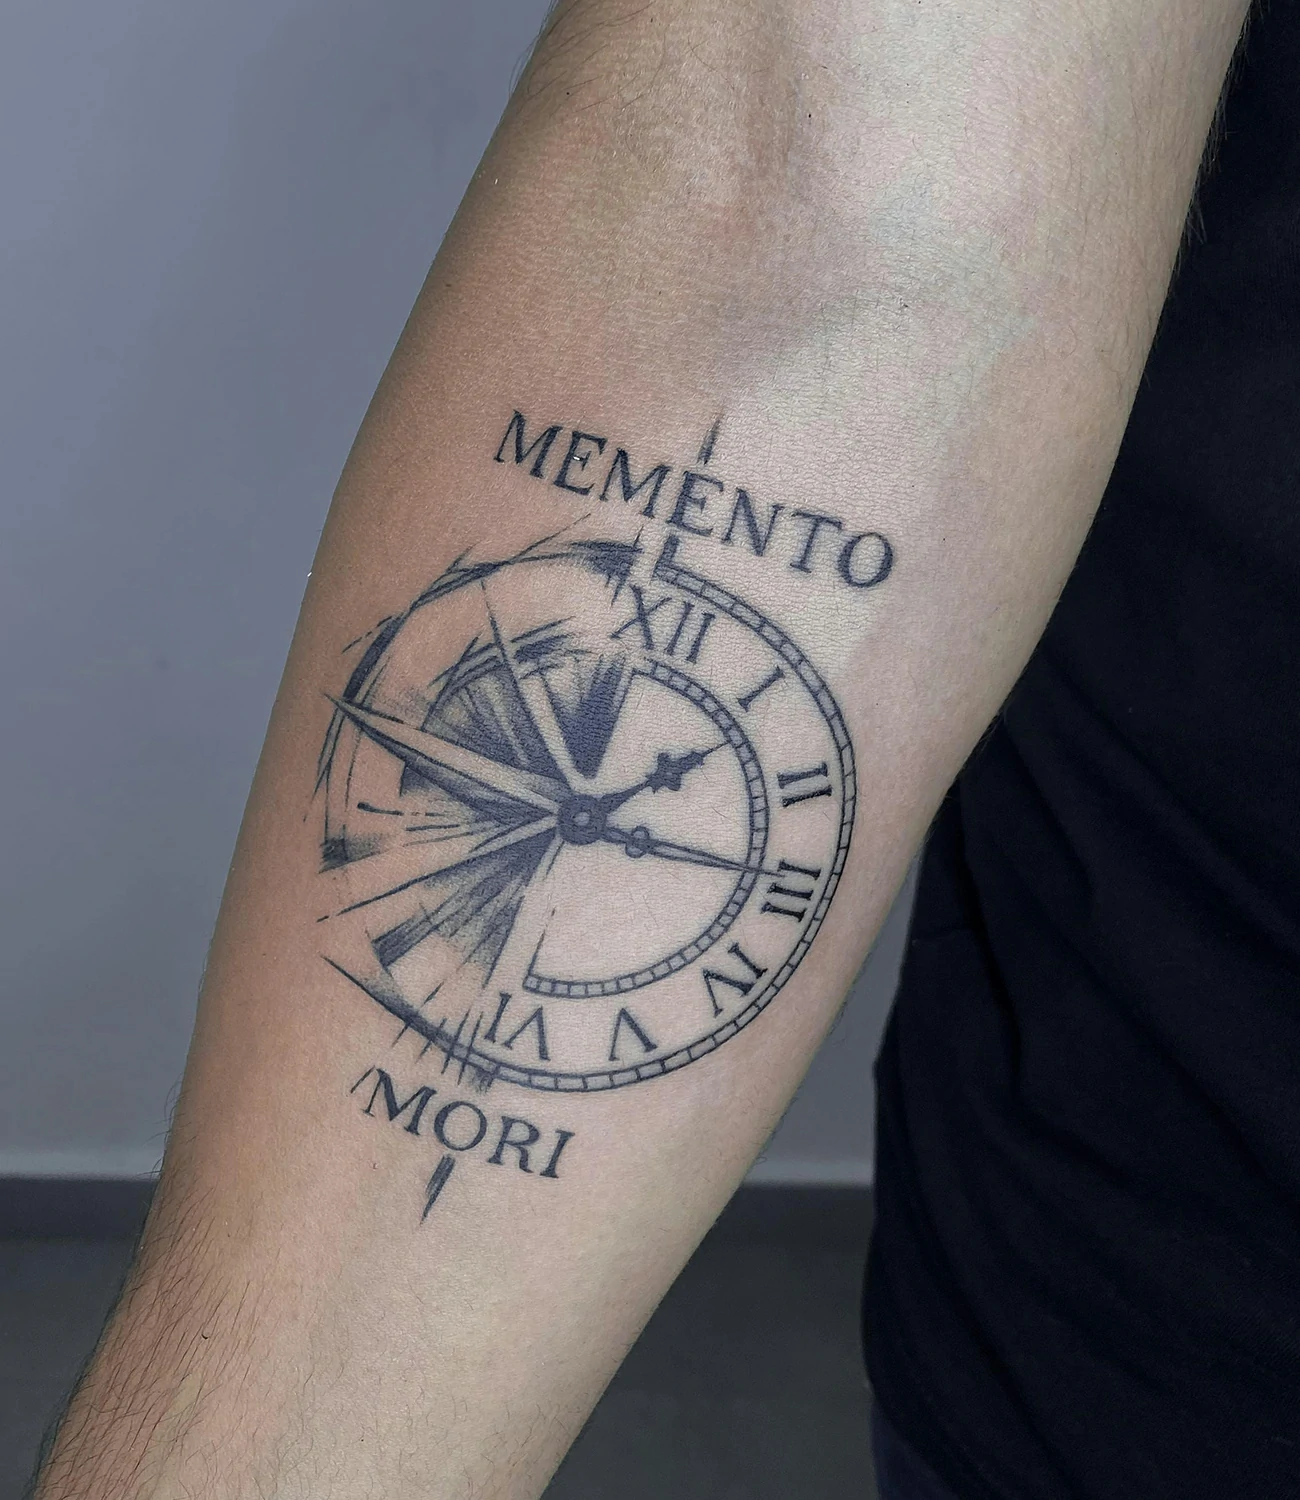 memento mori clock tattoo: A clock or watch tattoo paired with "memento mori," symbolizing the passage of time and life's impermanence.